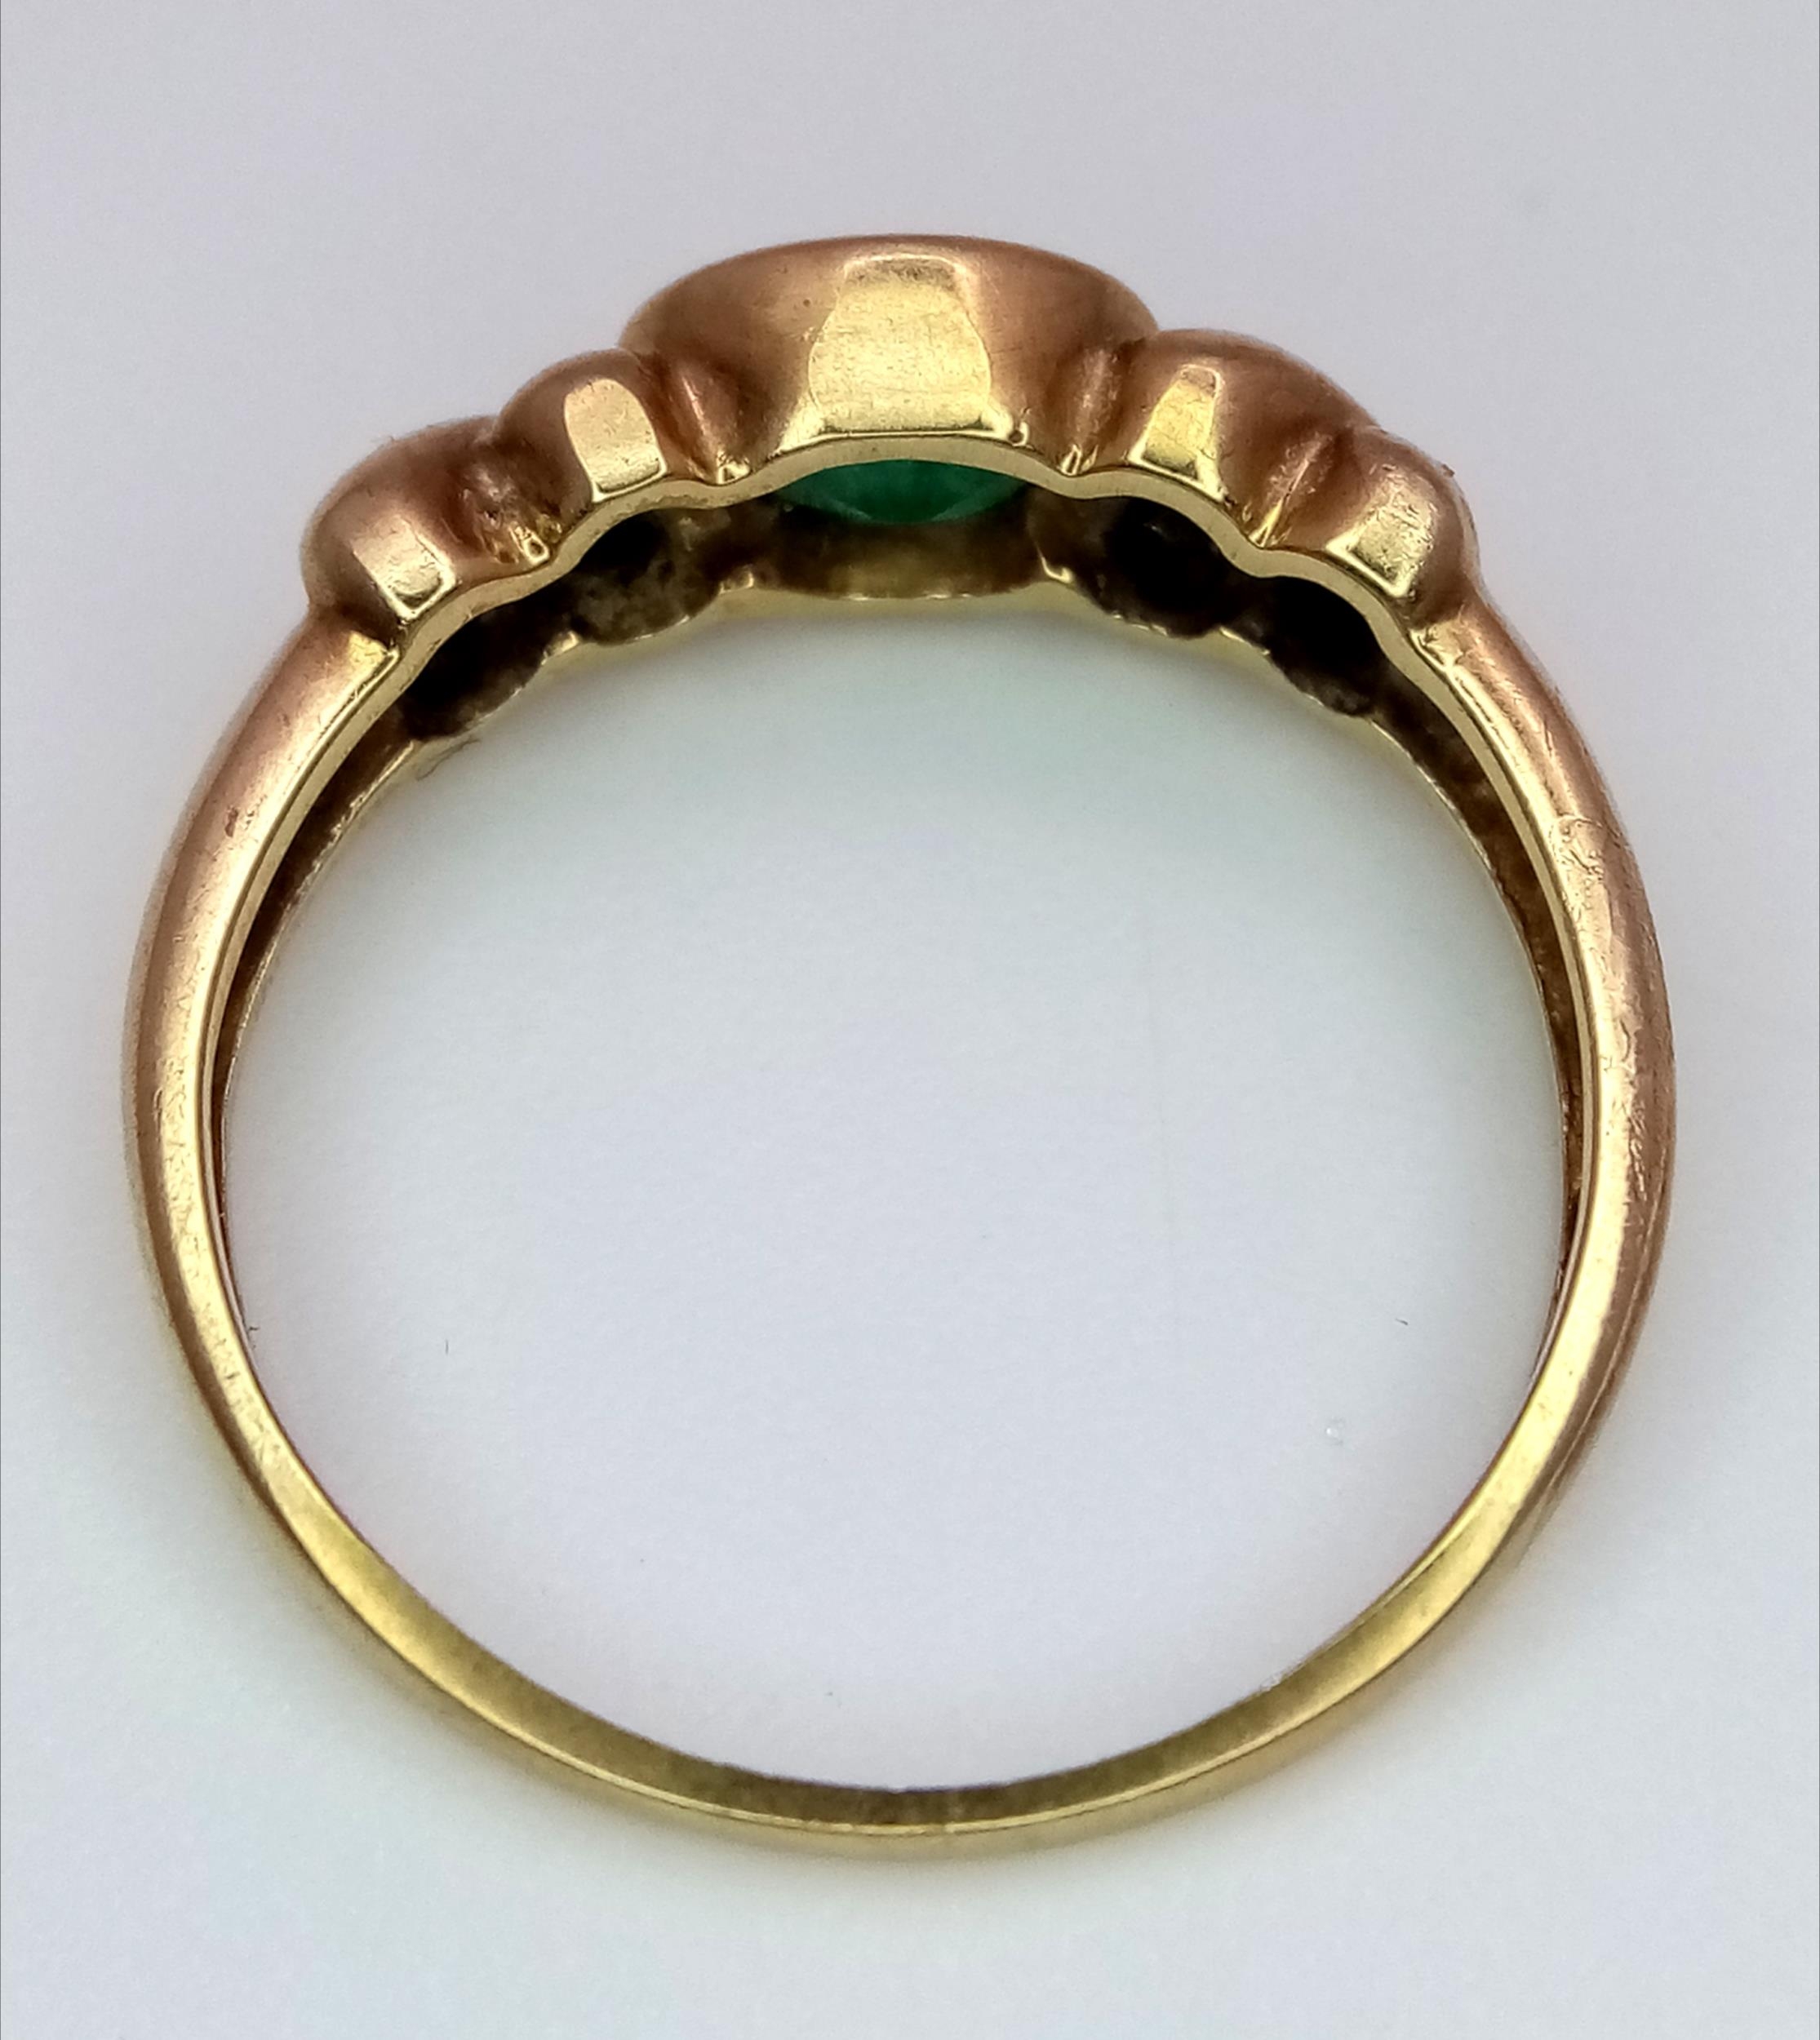 A Vintage 9K Yellow Gold and Emerald Ring. Size J. 2g total weight. - Image 4 of 6